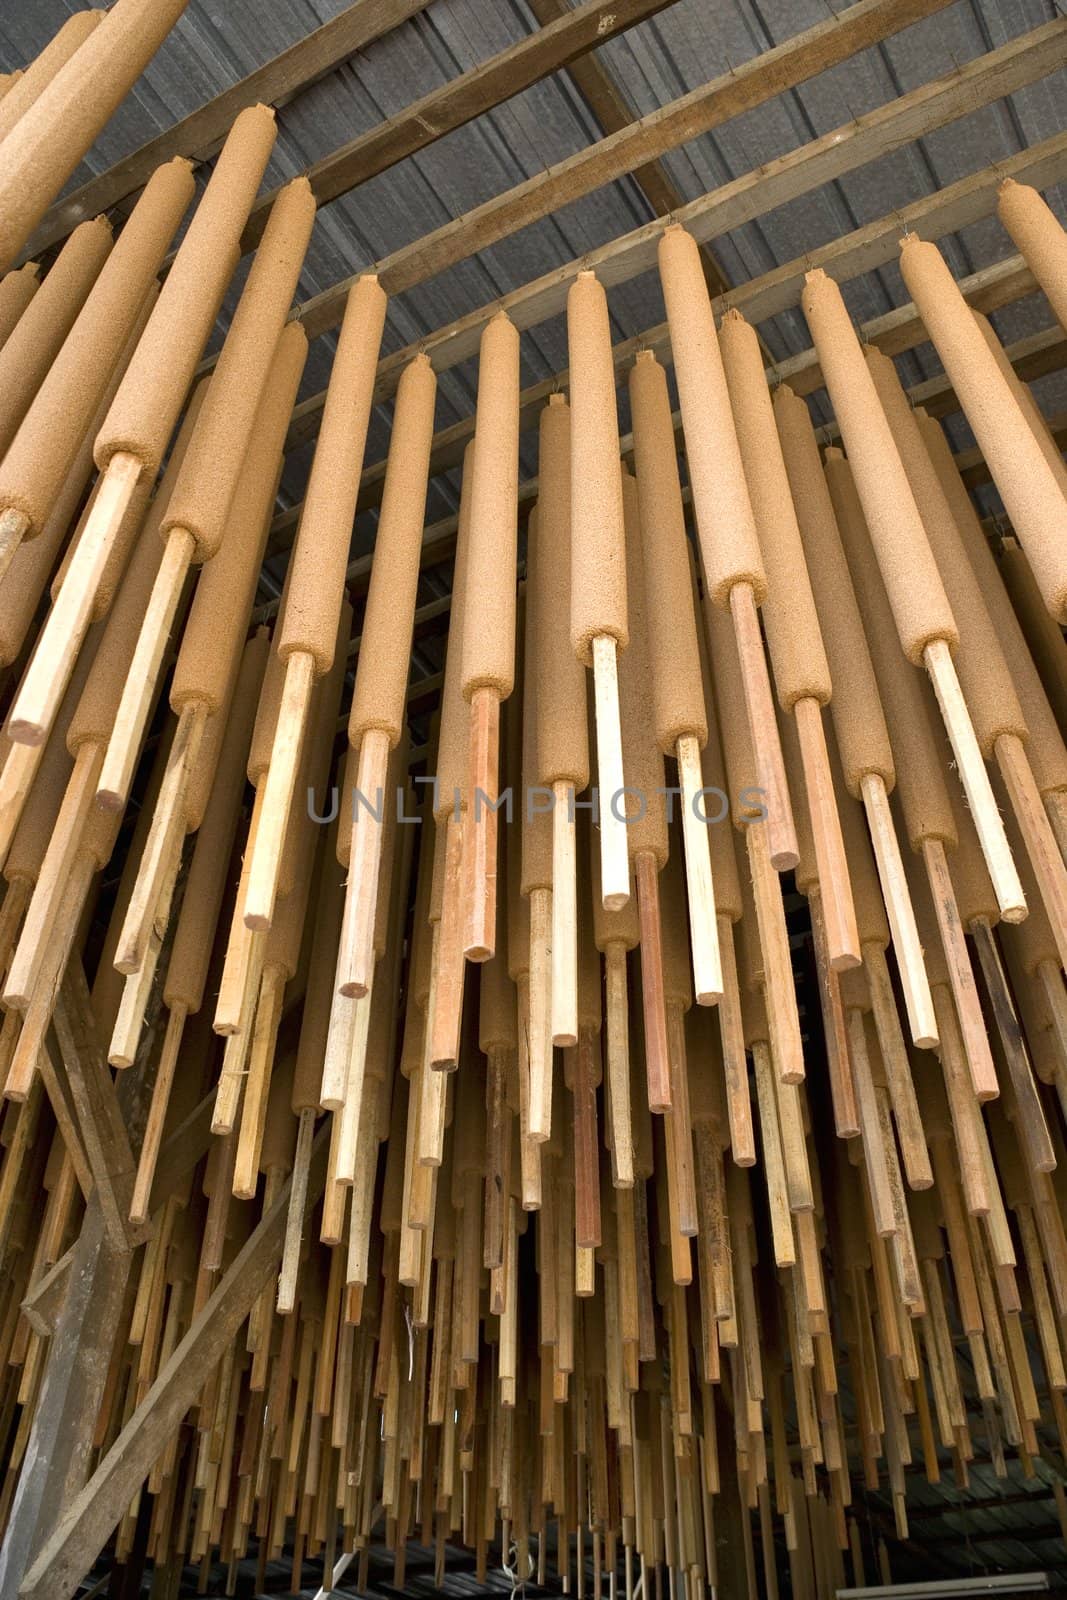 Image of joss sticks being hang dried at a factory in Malaysia.